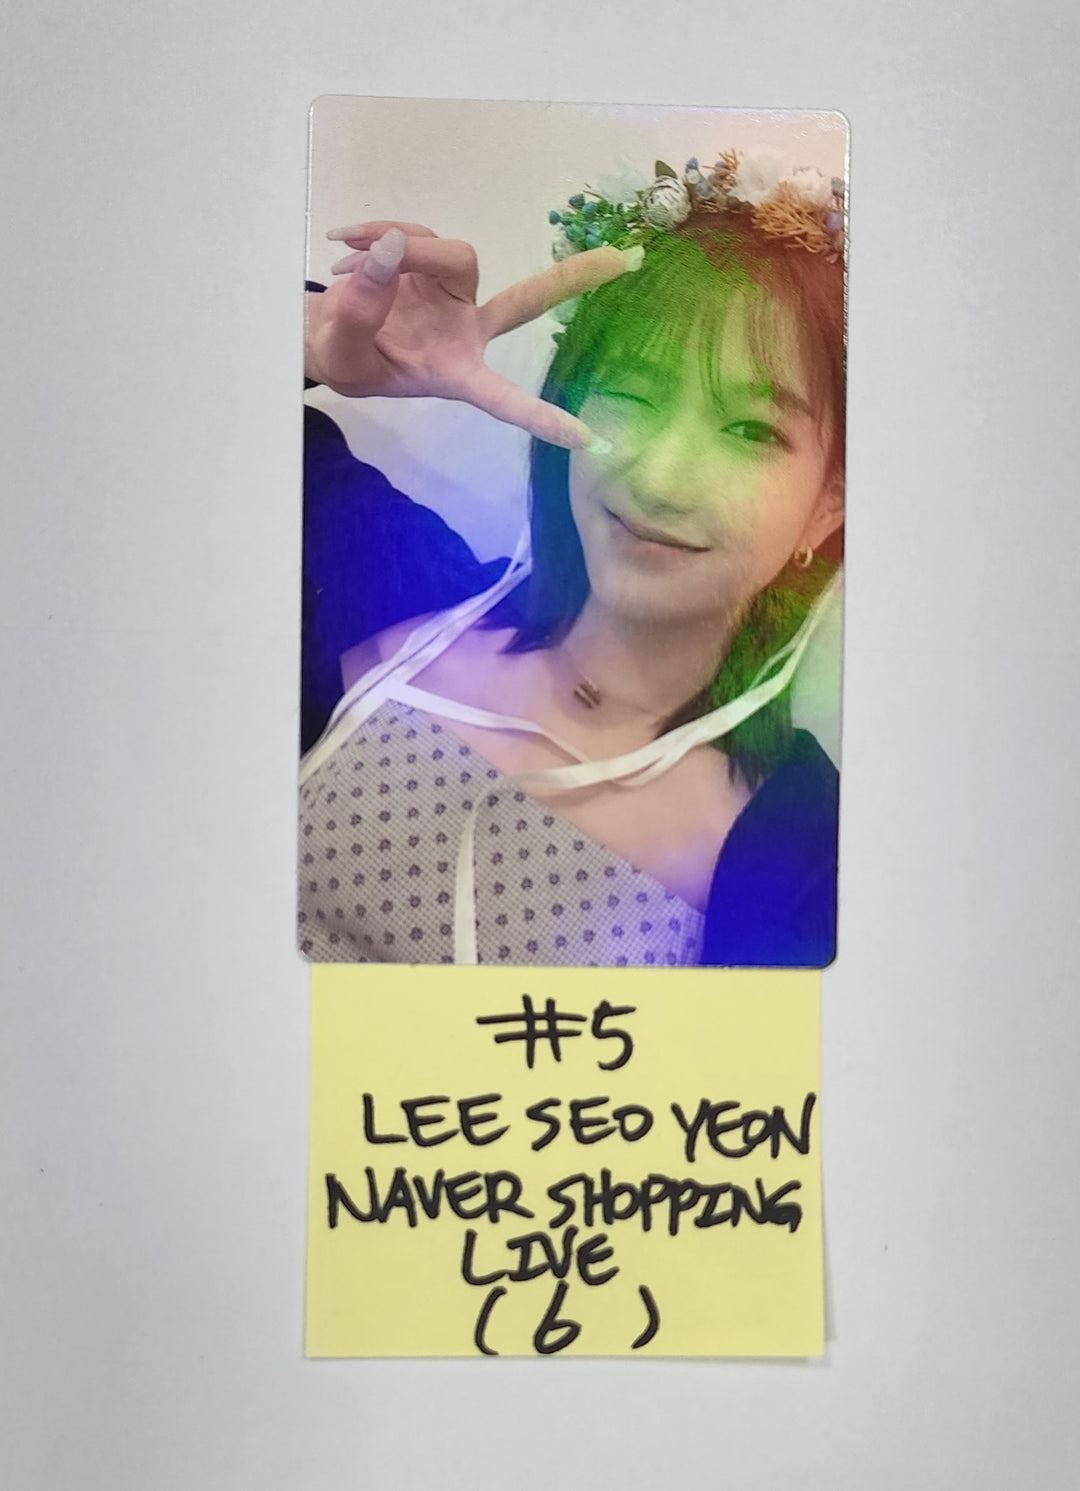 Fromis_9 "from our Memento Box" - NAVER ショッピング ライブ Weverse Shop 予約特典フォトカード/ホログラムフォトカード